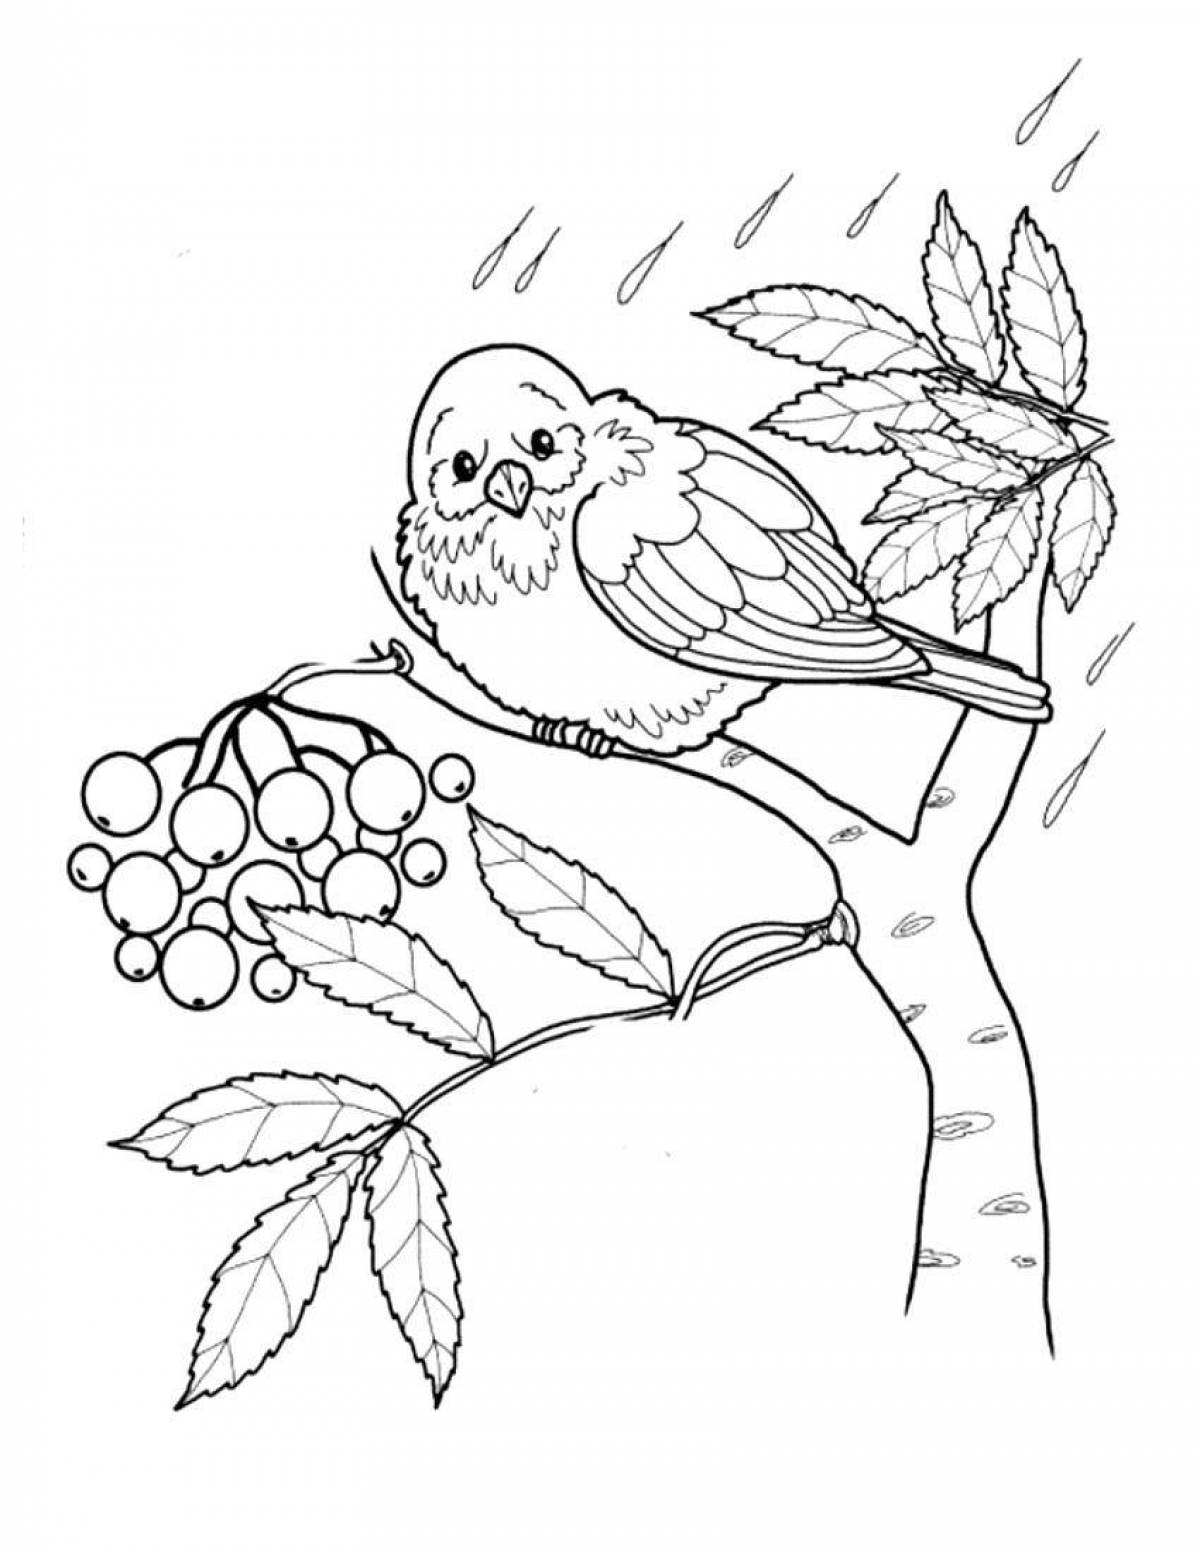 Bright rowan branch coloring book for kids